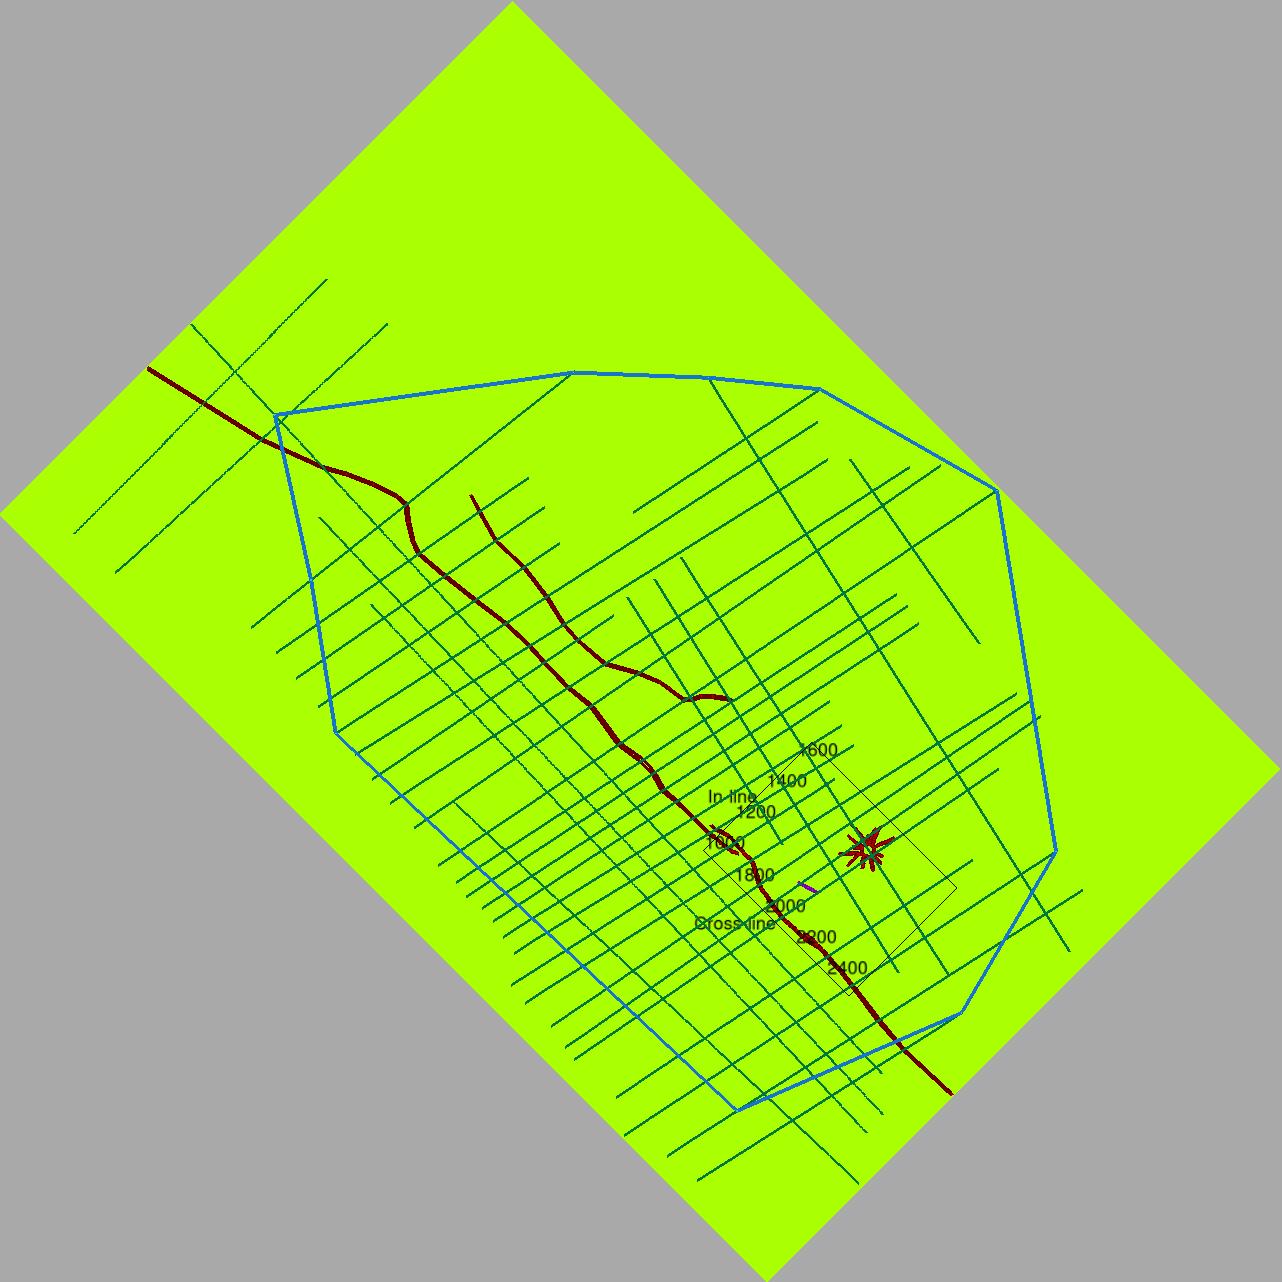 Example of an horizon created by the plugin and various polygons drawn across the extent of the 2D and 3D seismic data in the project